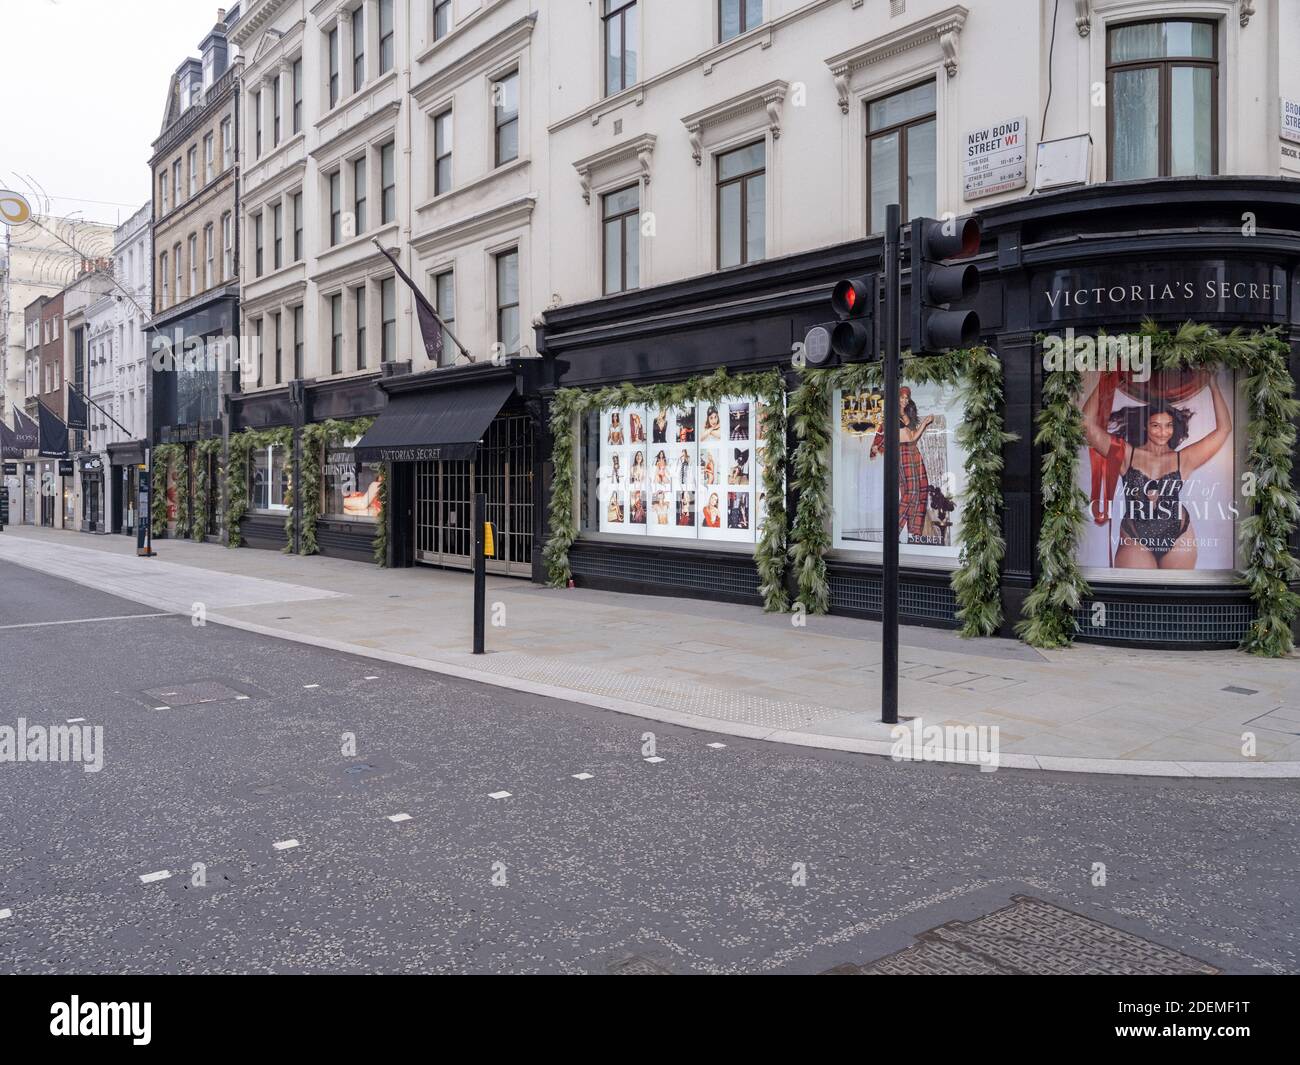 GREAT BRITAIN / England / London / Victoria Secret closed storefront in New Bond Street . Stock Photo